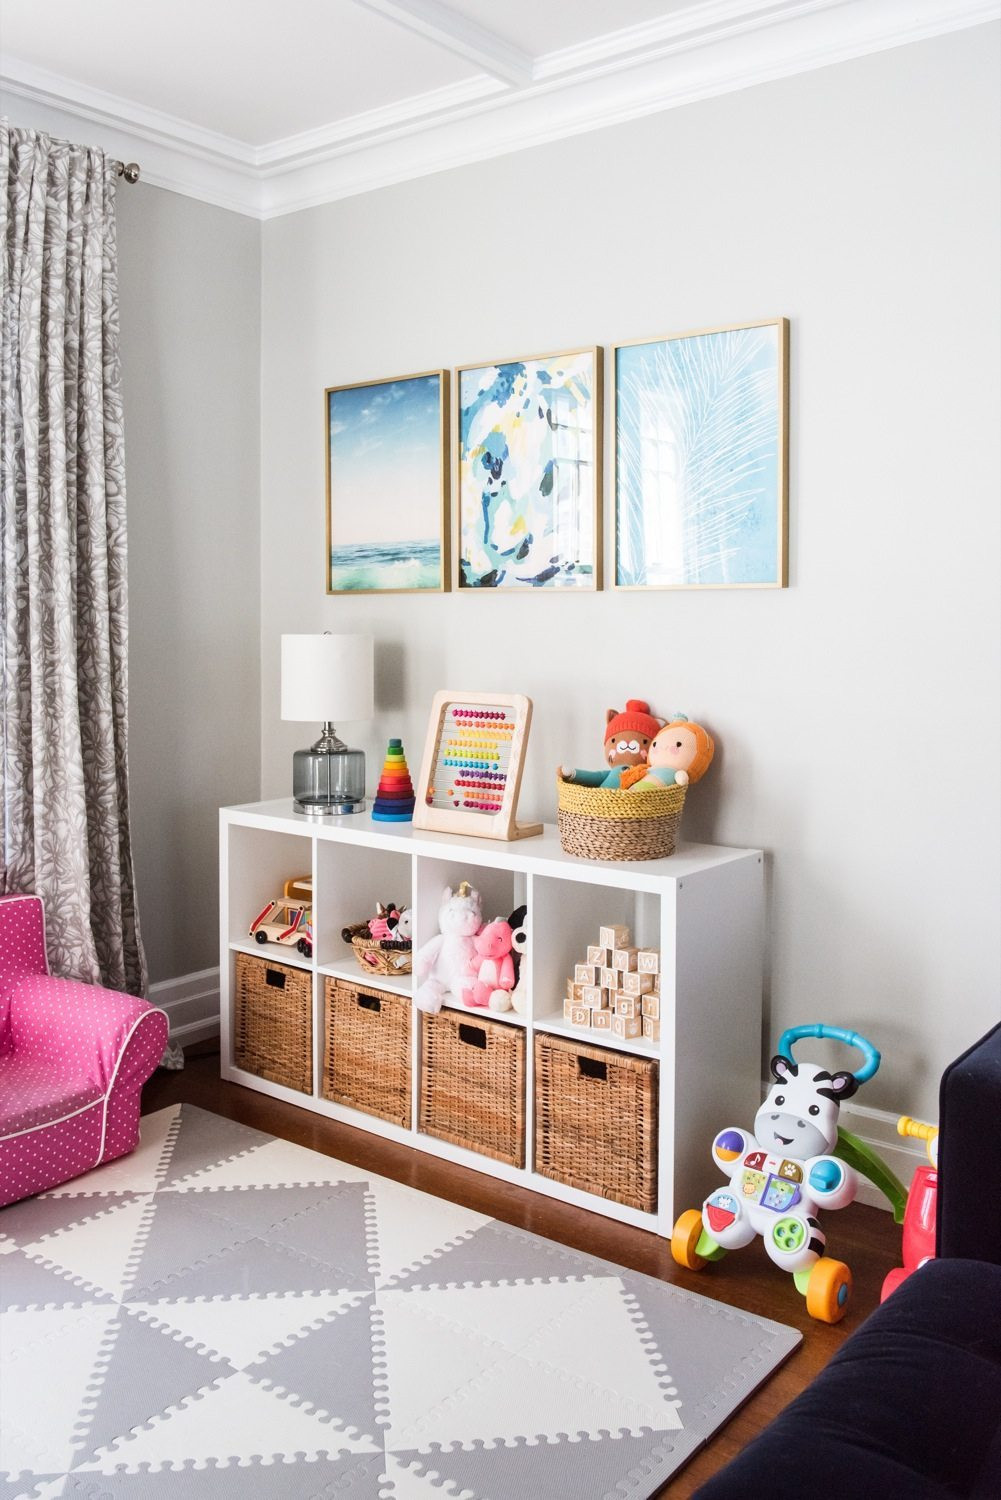 Kids Playroom Ideas
 Emerson s Modern Playroom Tour The Sweetest Occasion